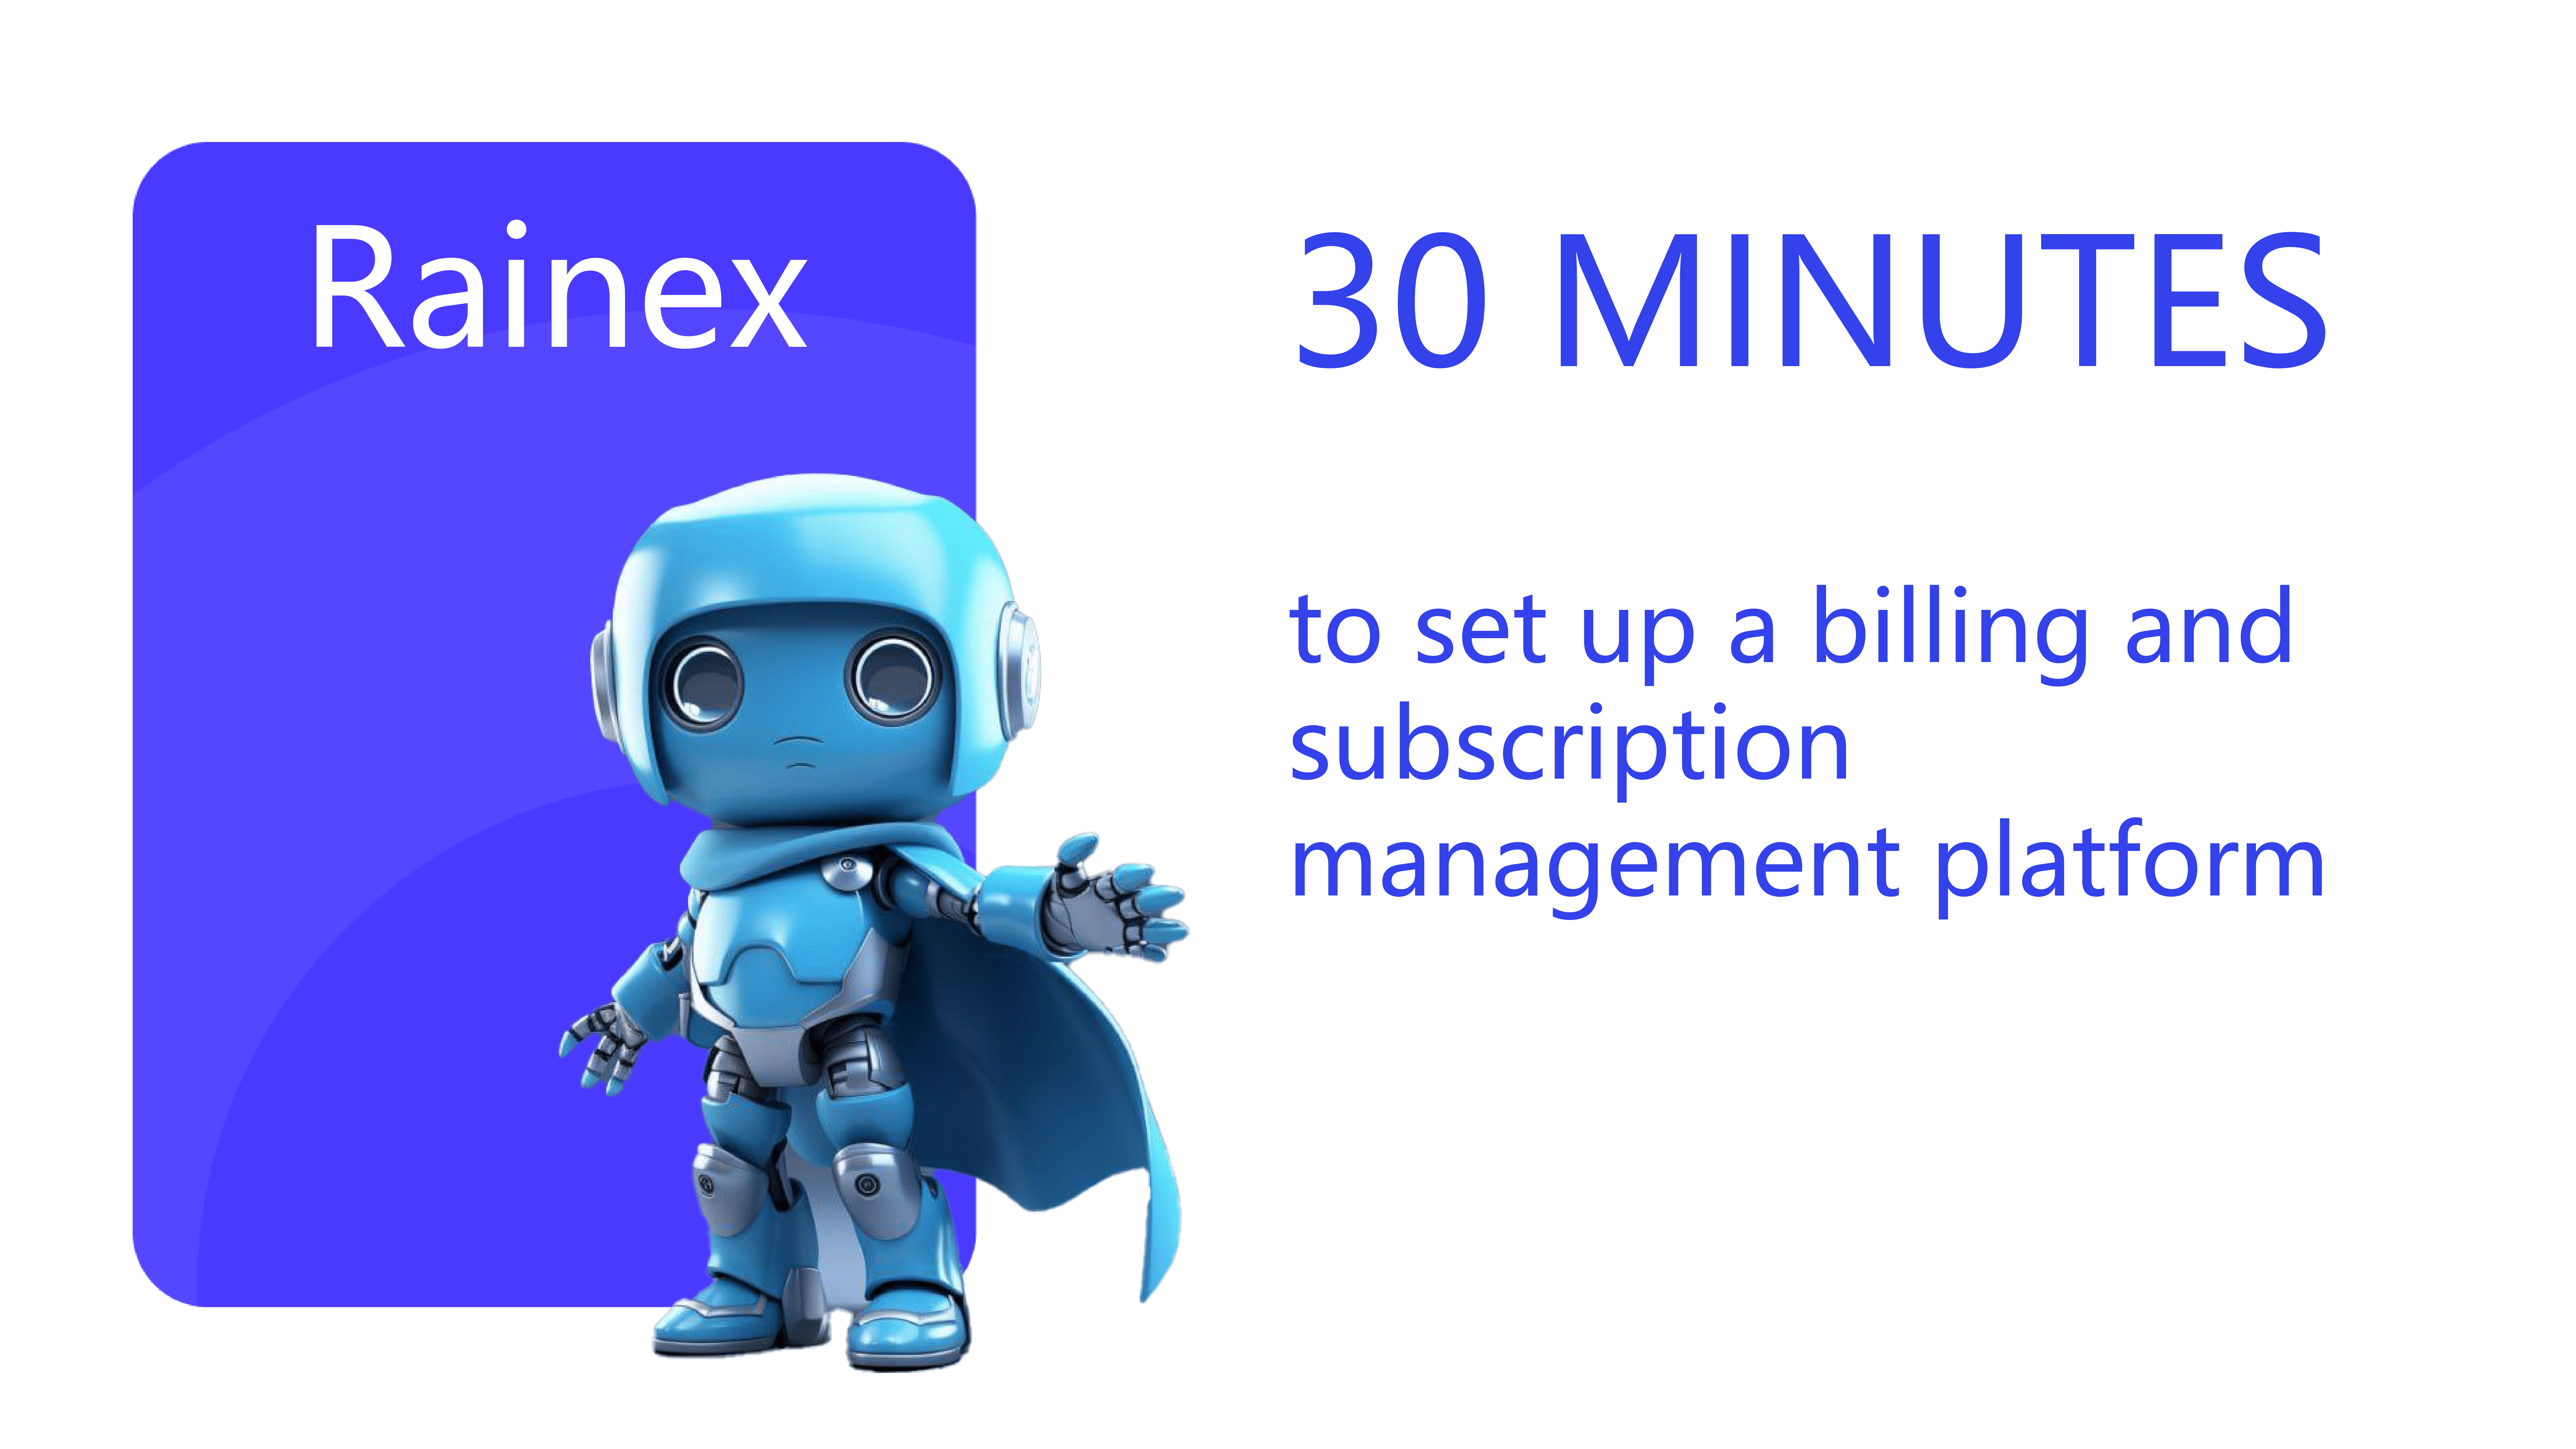 Rainex - Your ideal billing and subscription management system